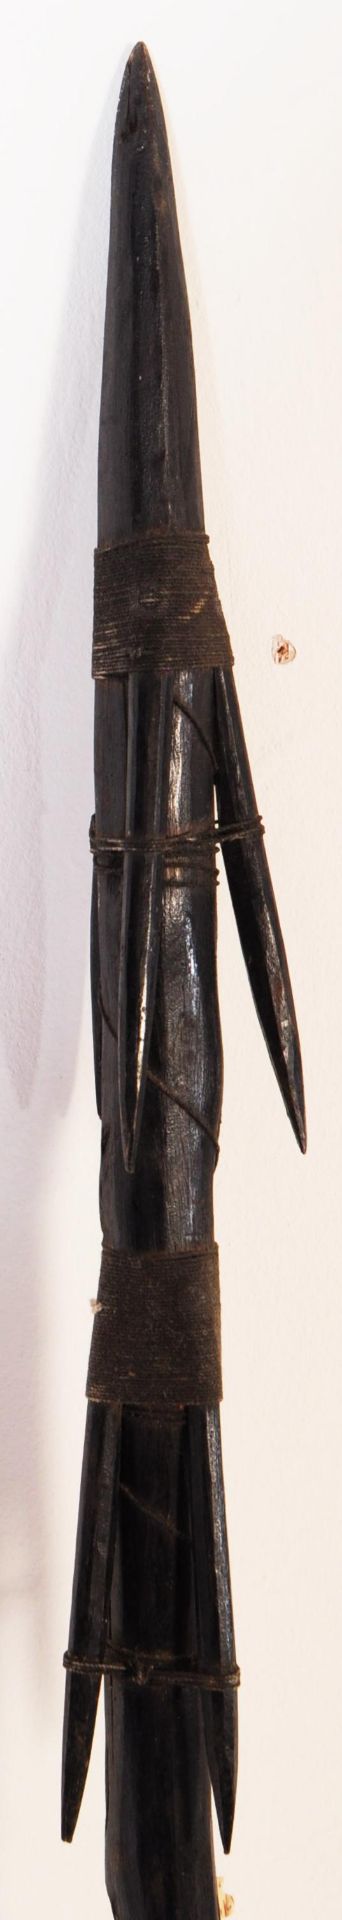 EARLY 20TH CENTURY AFRICAN FISHING SPEAR - Image 2 of 4